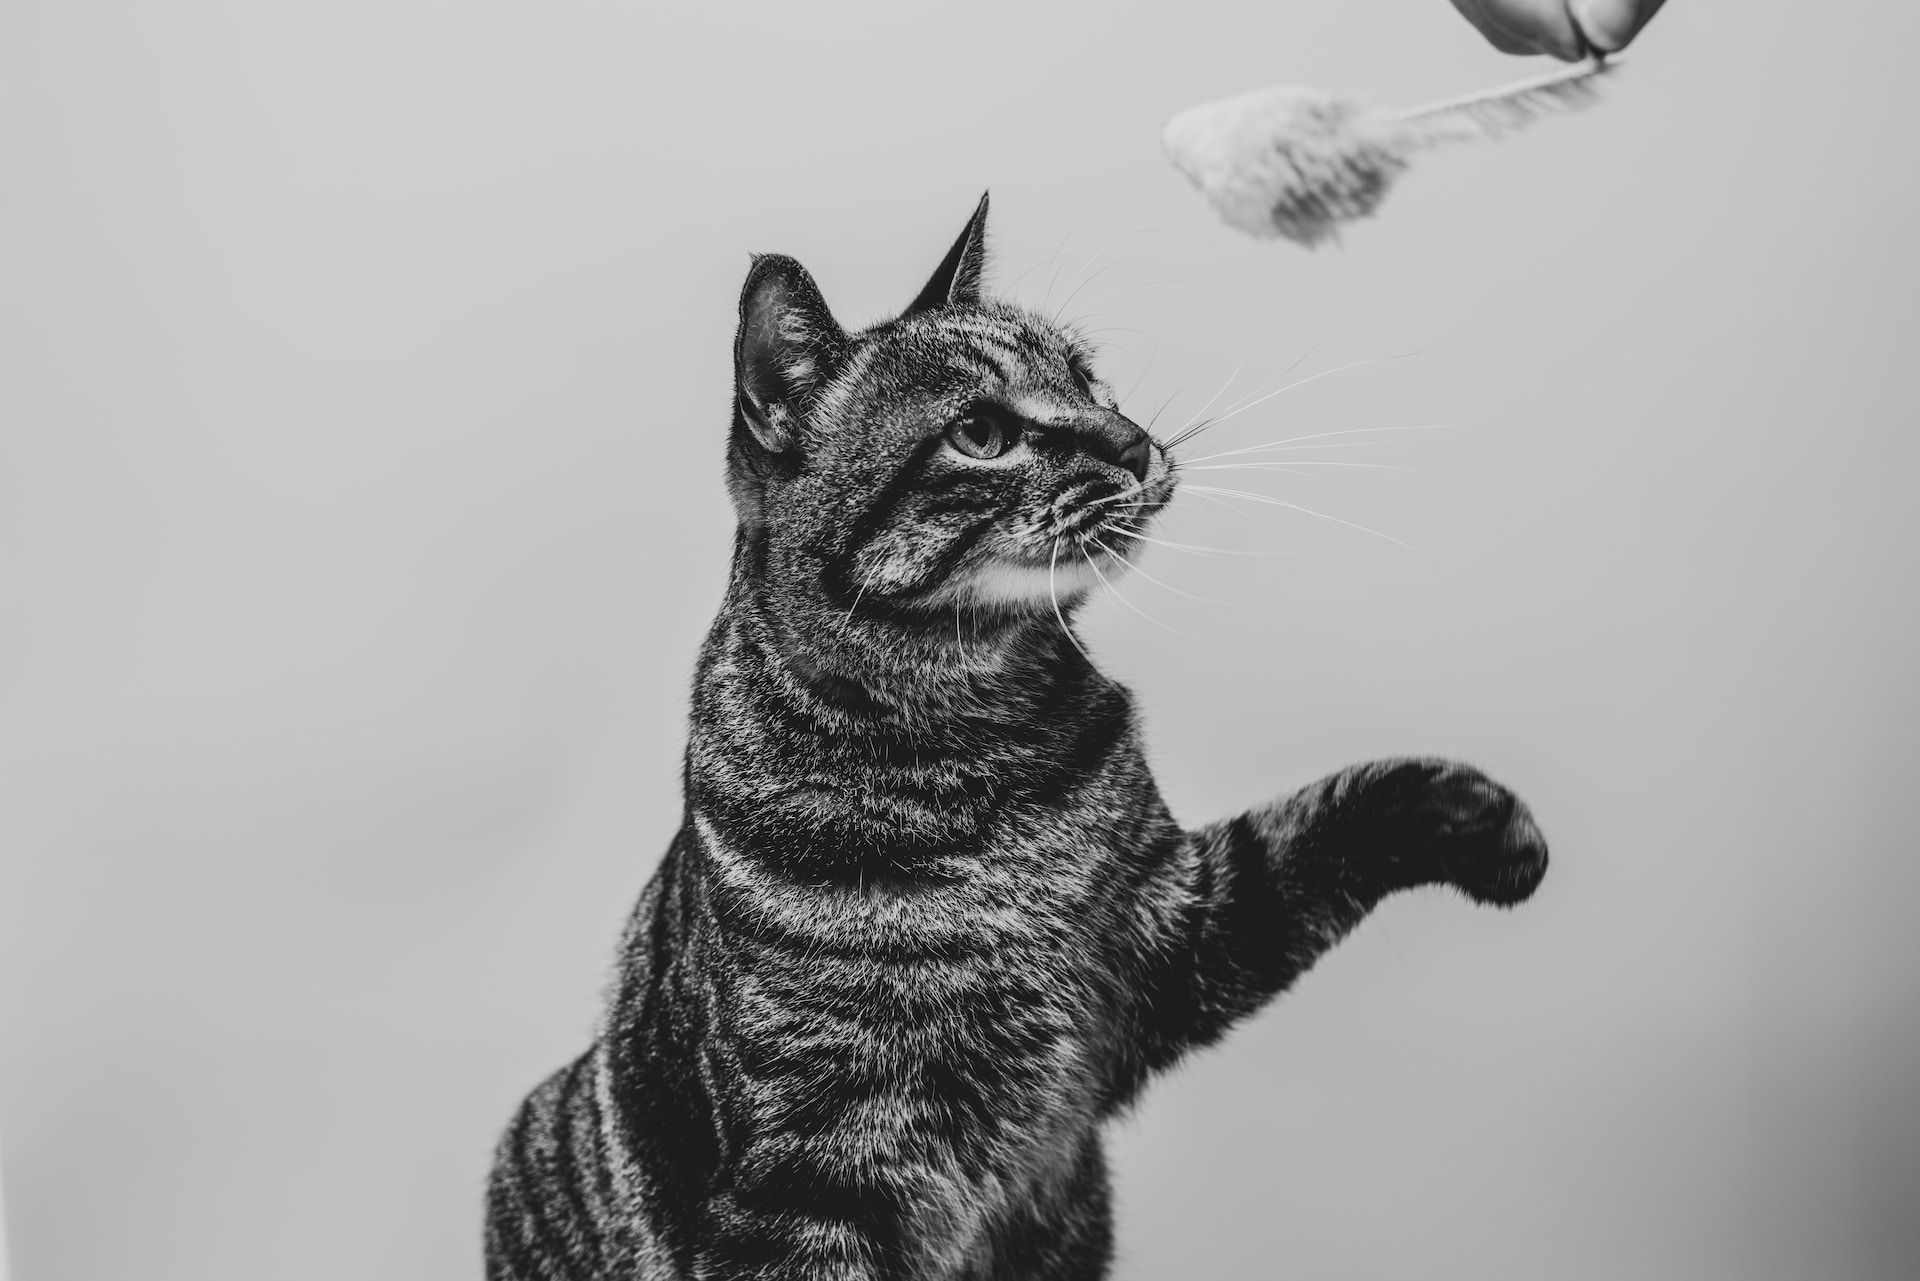 cat playing with mouse toy in black and white